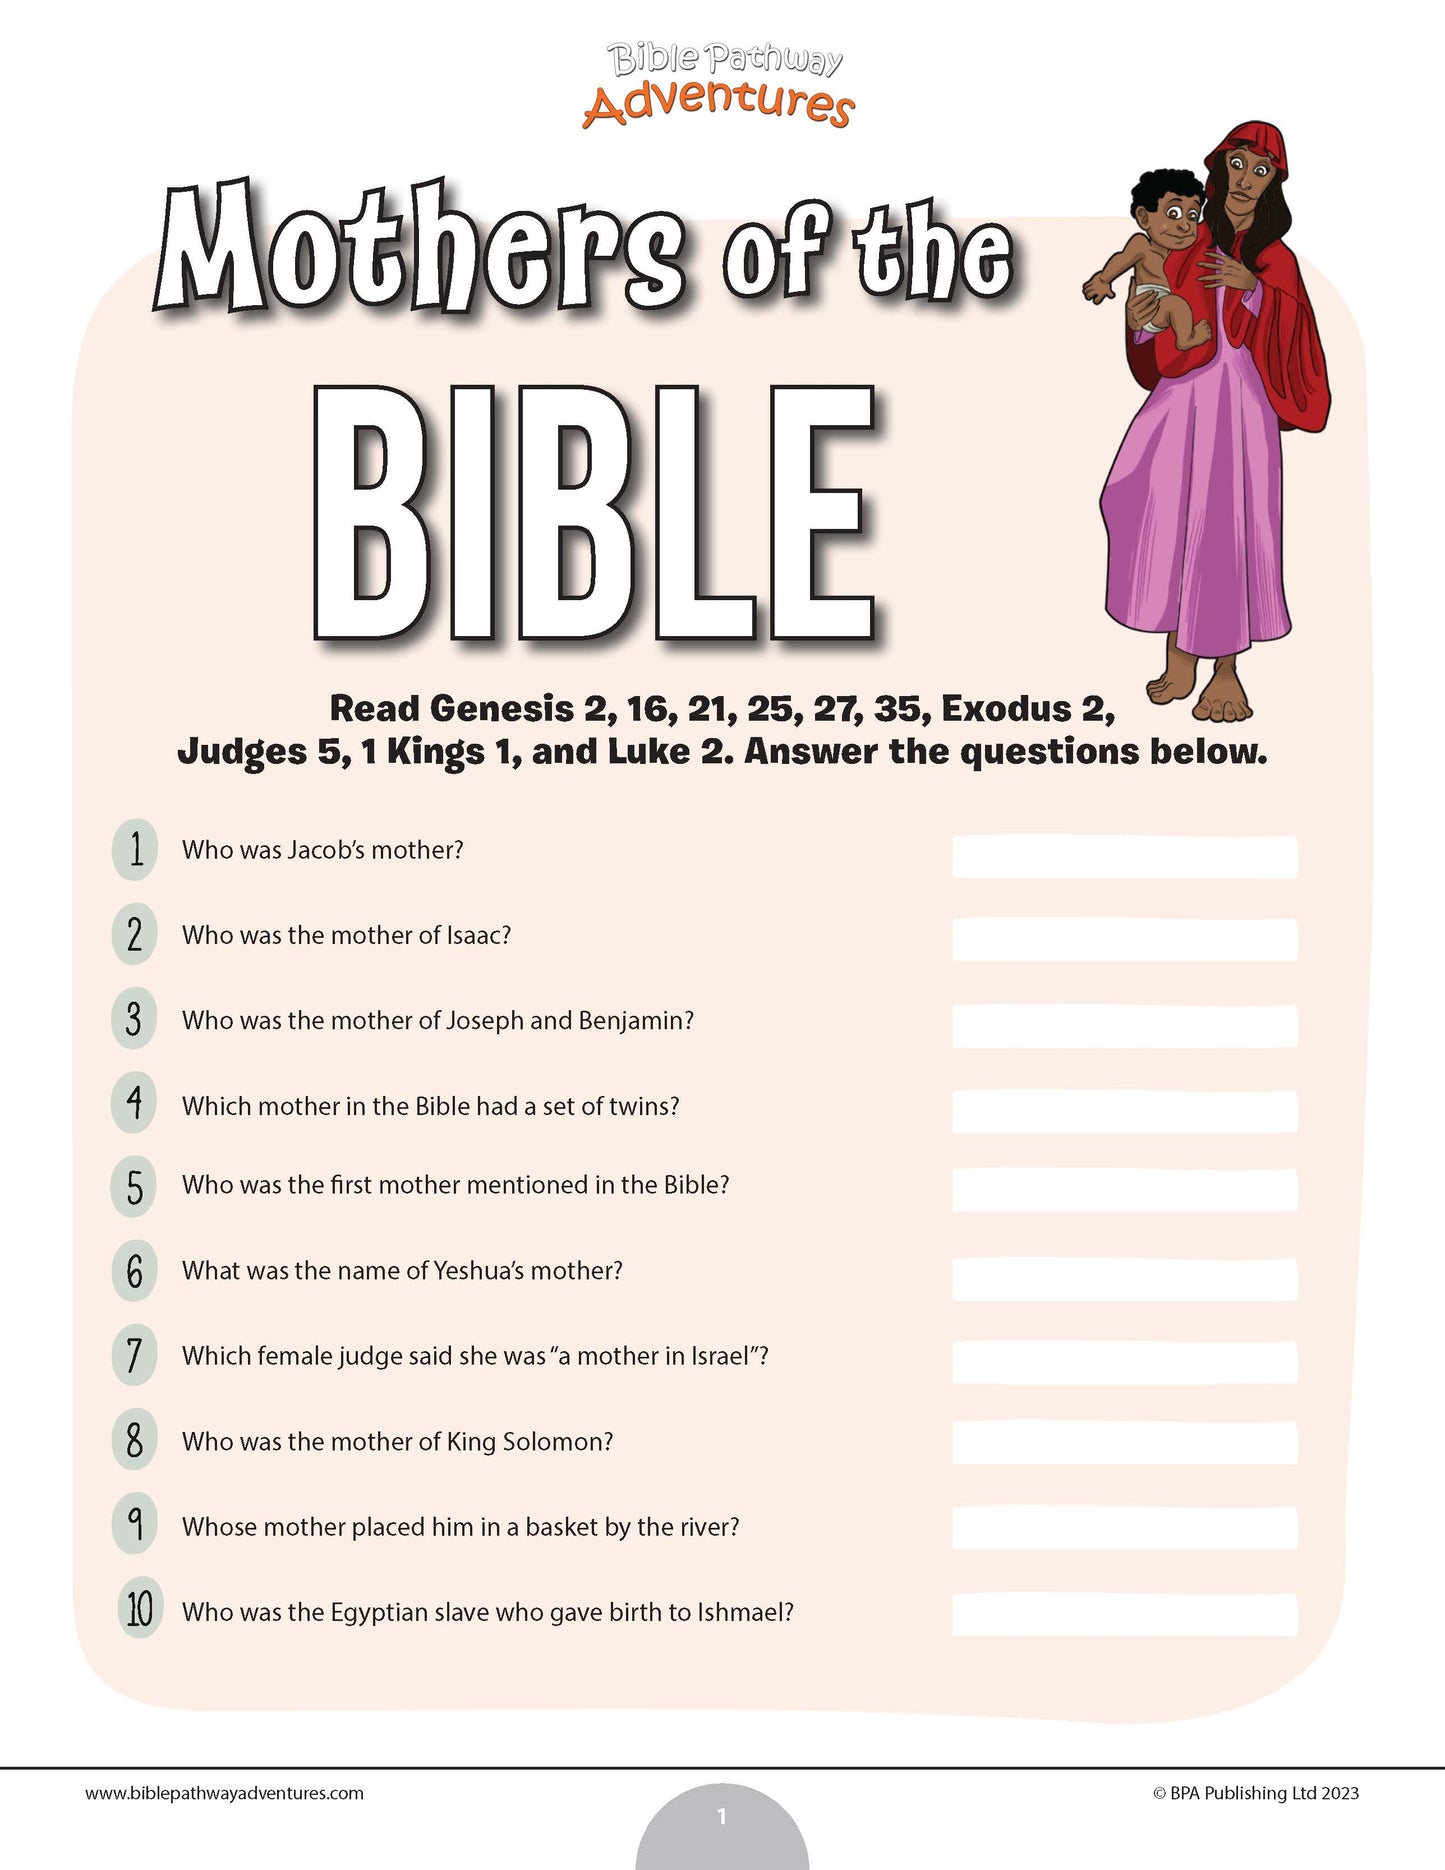 Mothers of the Bible quiz